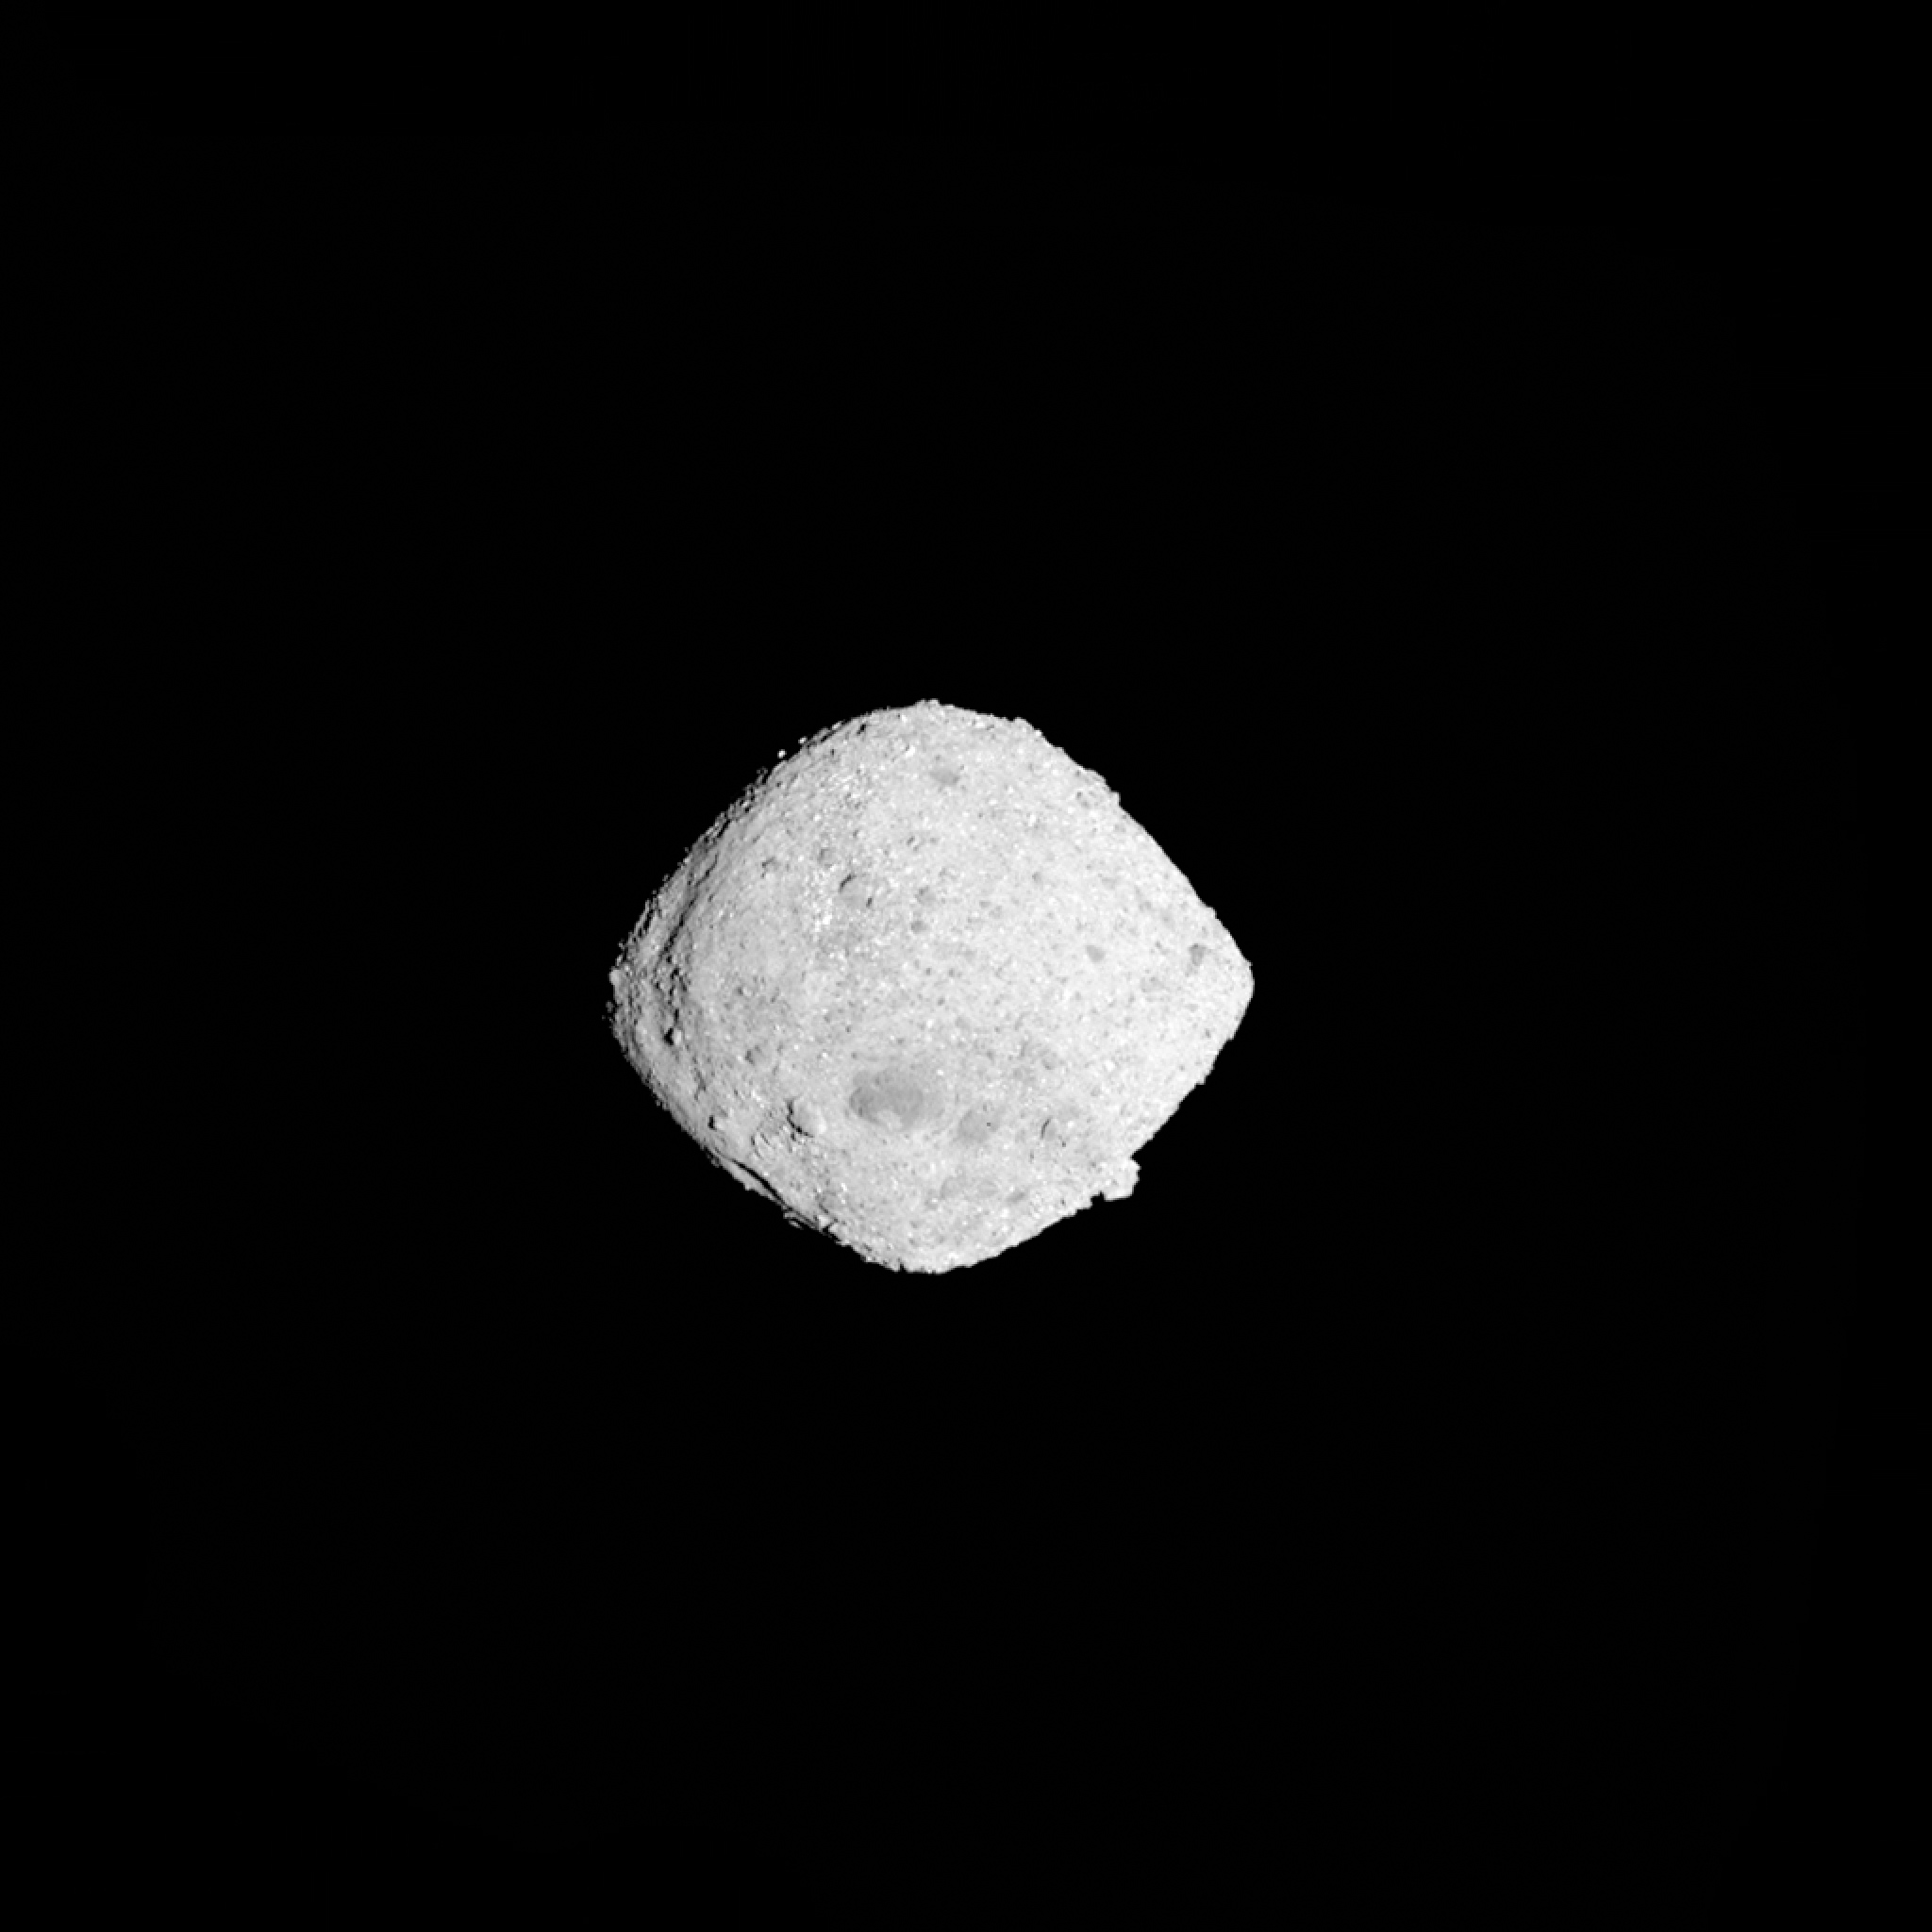 This video shows the OSIRIS-REx spacecraft’s view of Bennu during the final phase of its journey to the asteroid. From Aug. 17 through Nov. 27 the spacecraft’s PolyCam camera imaged Bennu almost daily as the spacecraft traveled 1.4 million miles (2.2 million km) toward the asteroid. The final images were obtained from a distance of around 40 miles (65 km). During this period, OSIRIS-REx completed four maneuvers slowing the spacecraft’s velocity from approximately 1,100 mph (491 m/sec) to 0.10 mph (0.04 m/sec) relative to Bennu, which resulted in the slower approach speed at the end of the video.Credit:  NASA/Goddard/University of Arizona